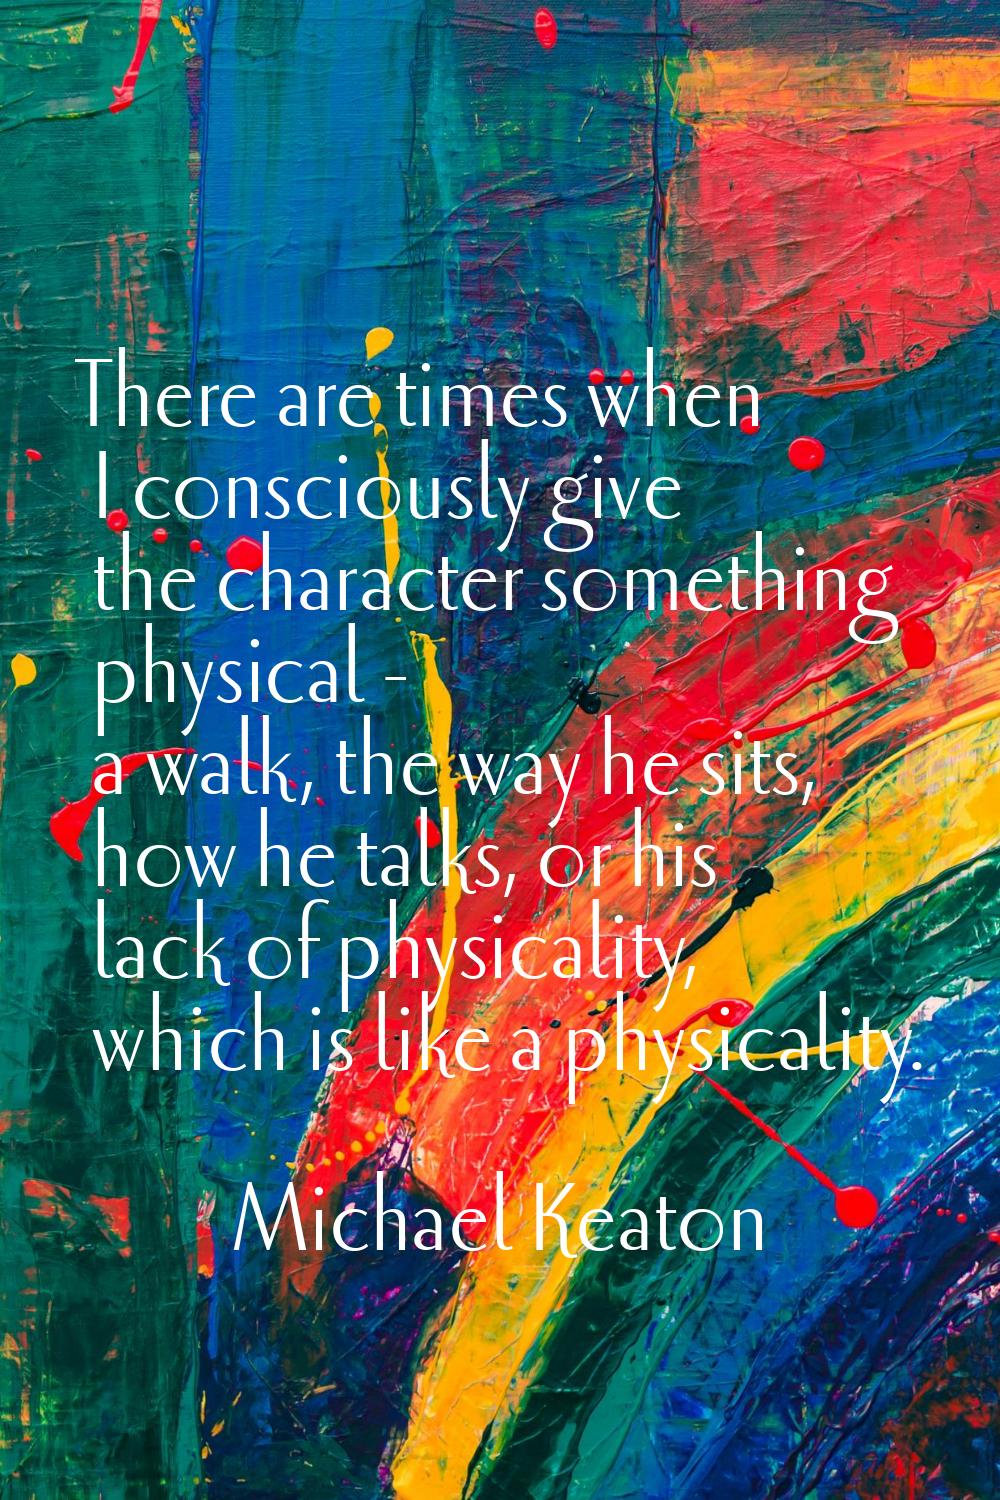 There are times when I consciously give the character something physical - a walk, the way he sits,